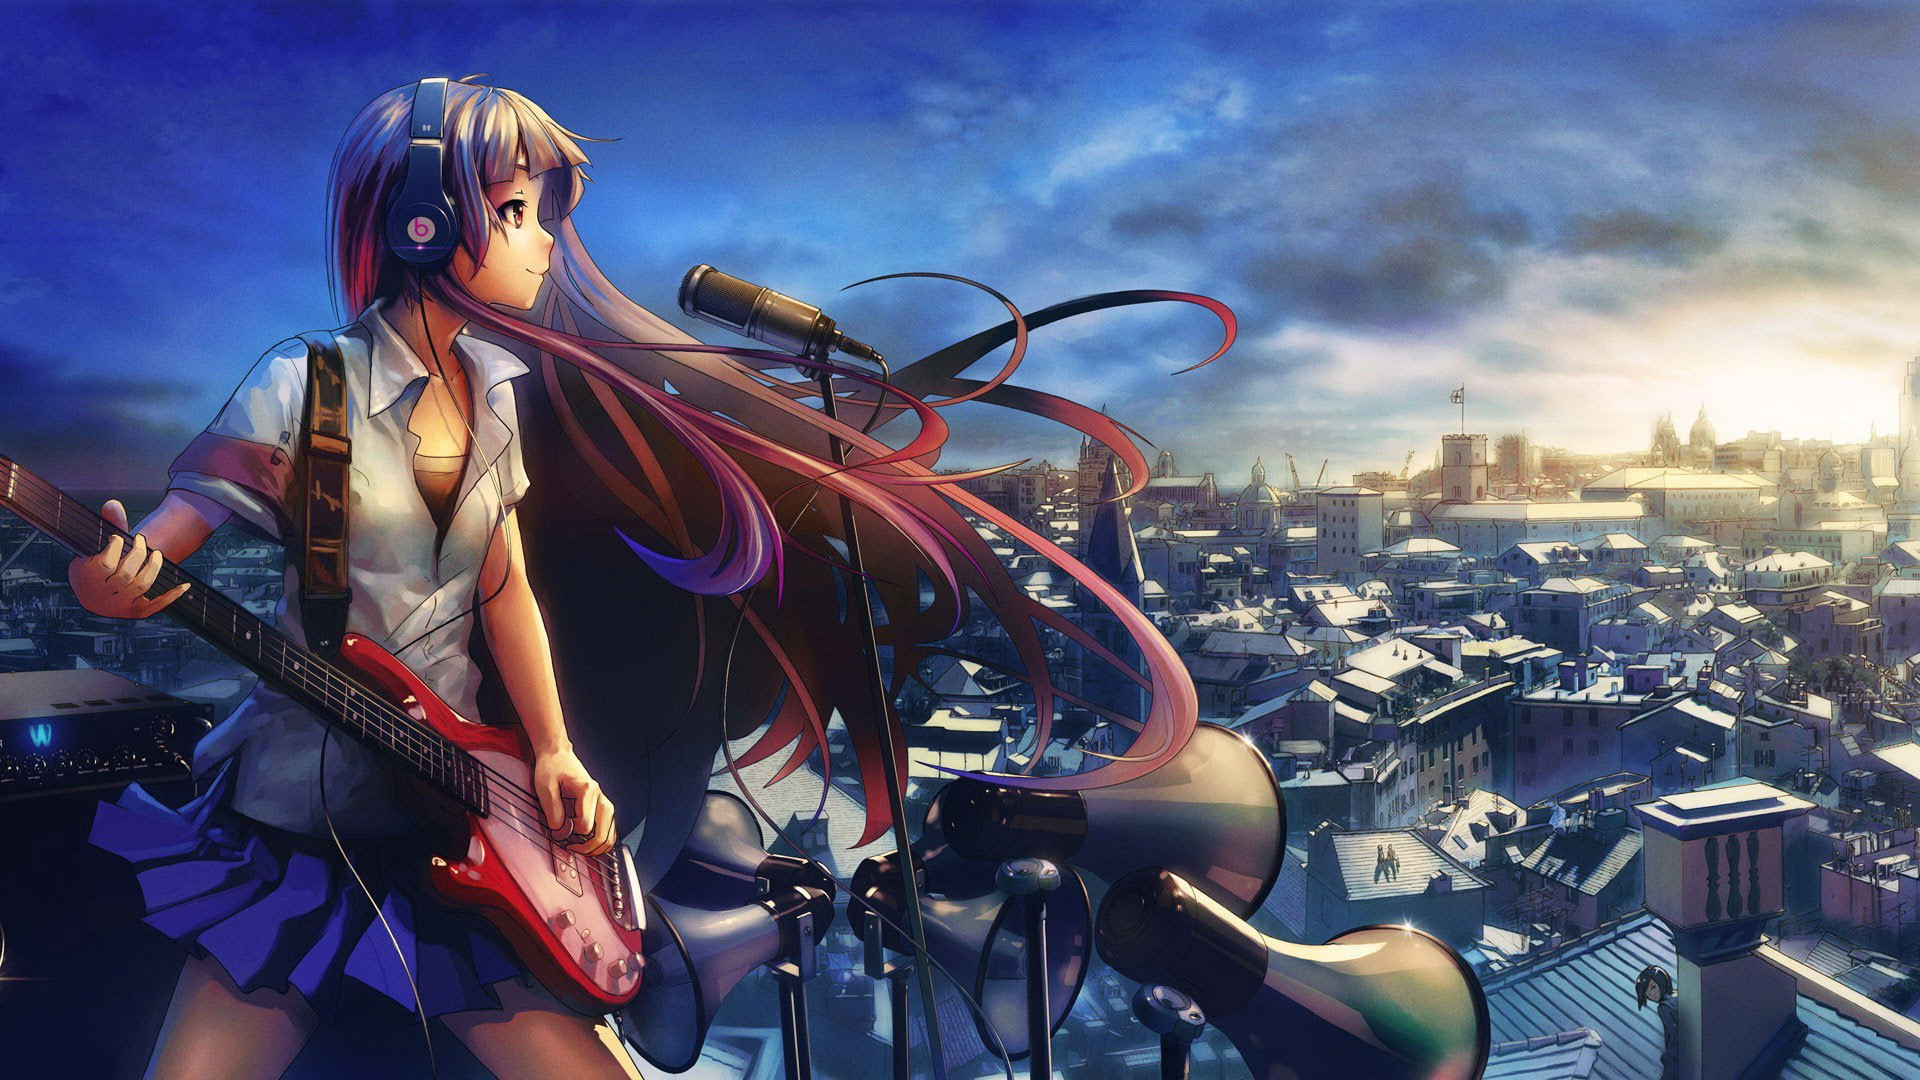 1920x1080 Anime Girl Play Guitar Music Picture Background #28300 Wallpaper | Emily  Osment | Pinterest | Wallpaper, Hd wallpaper and Anime